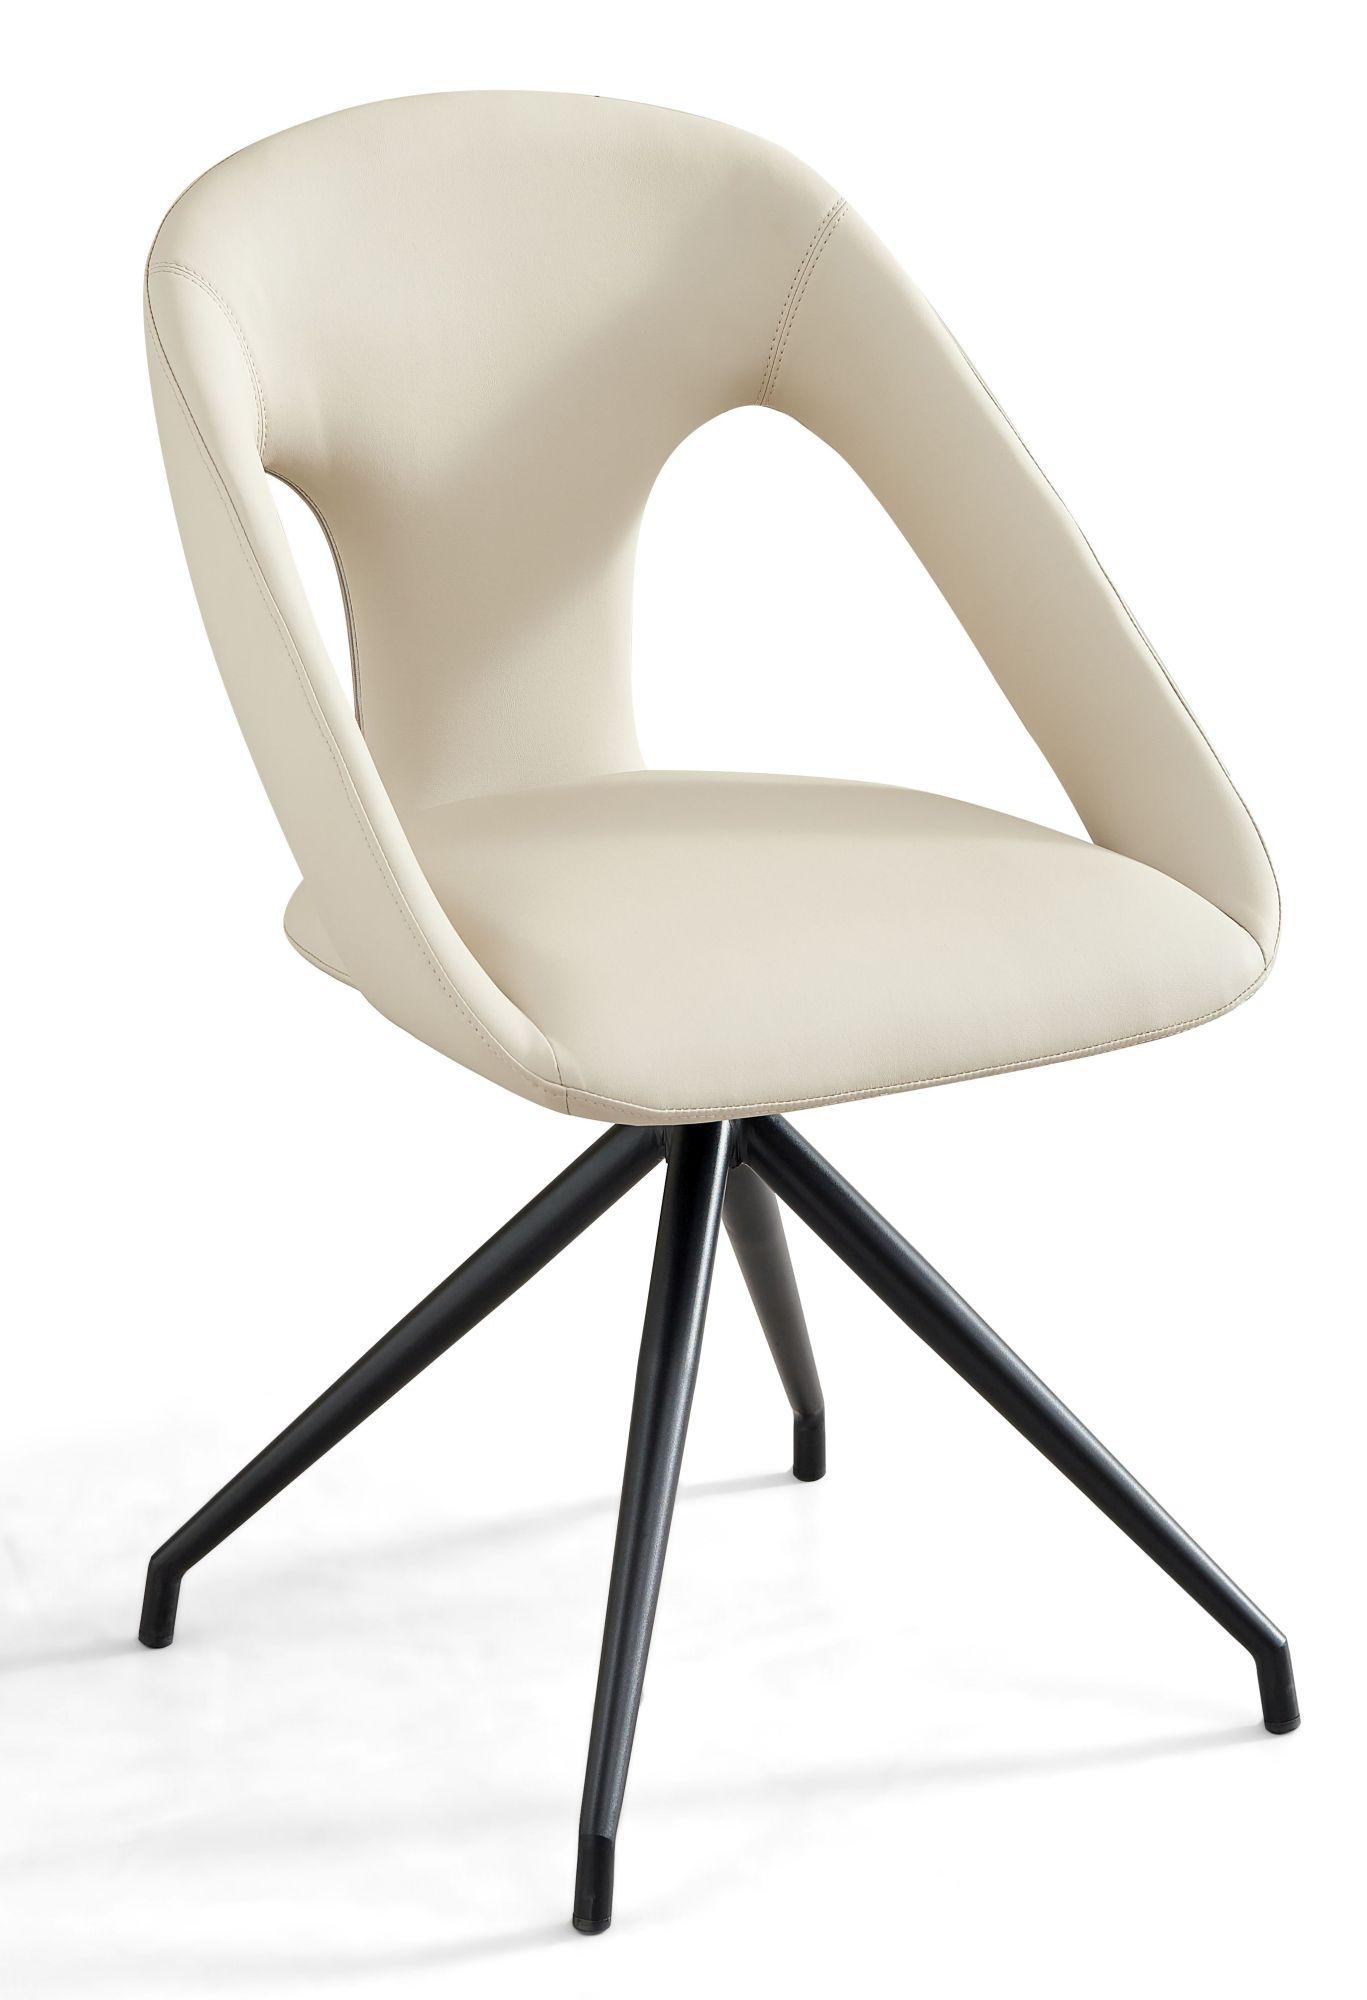 Marlow Cream Faux Leather Swivel Dining Chair with Black Legs